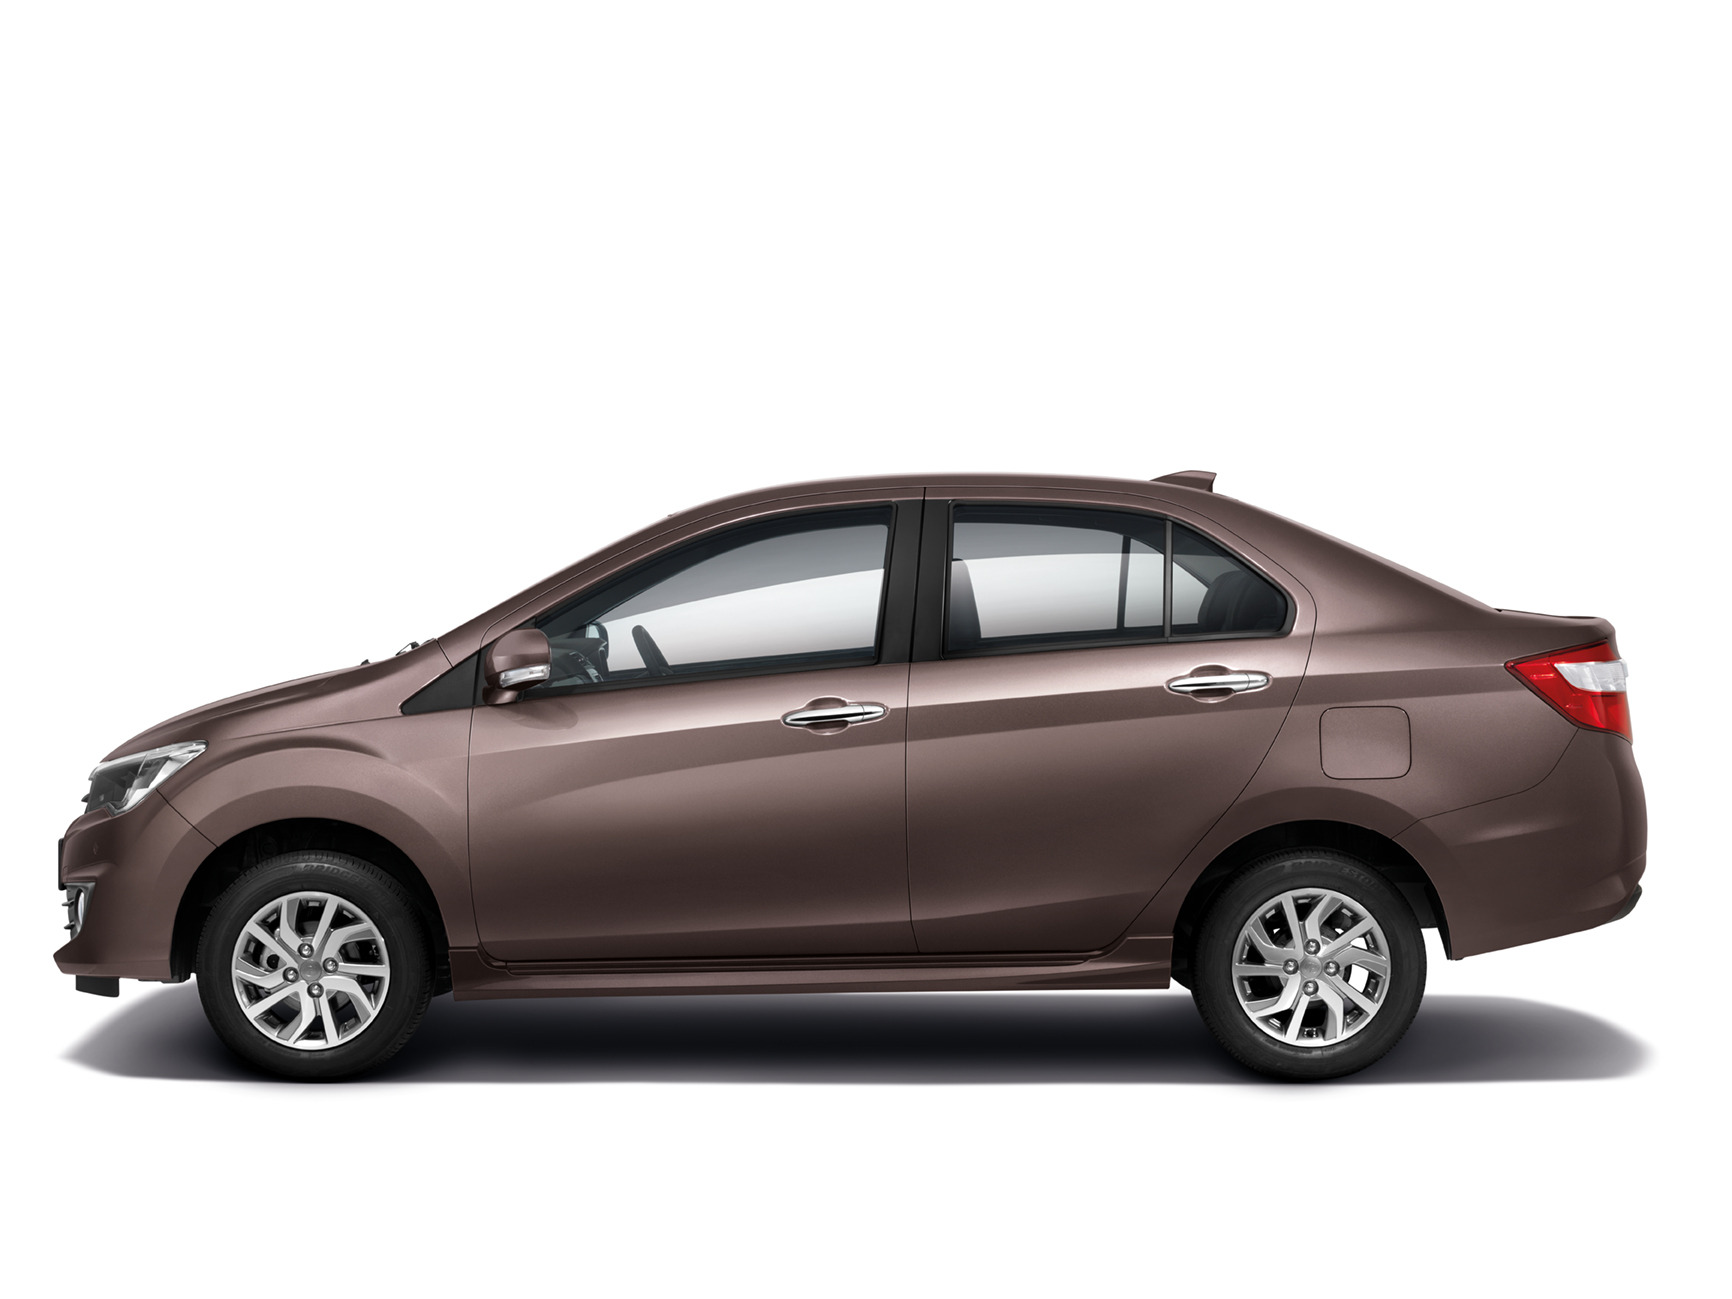 Perodua Bezza officially launched – first ever sedan, 1.0 VVTi and 1.3